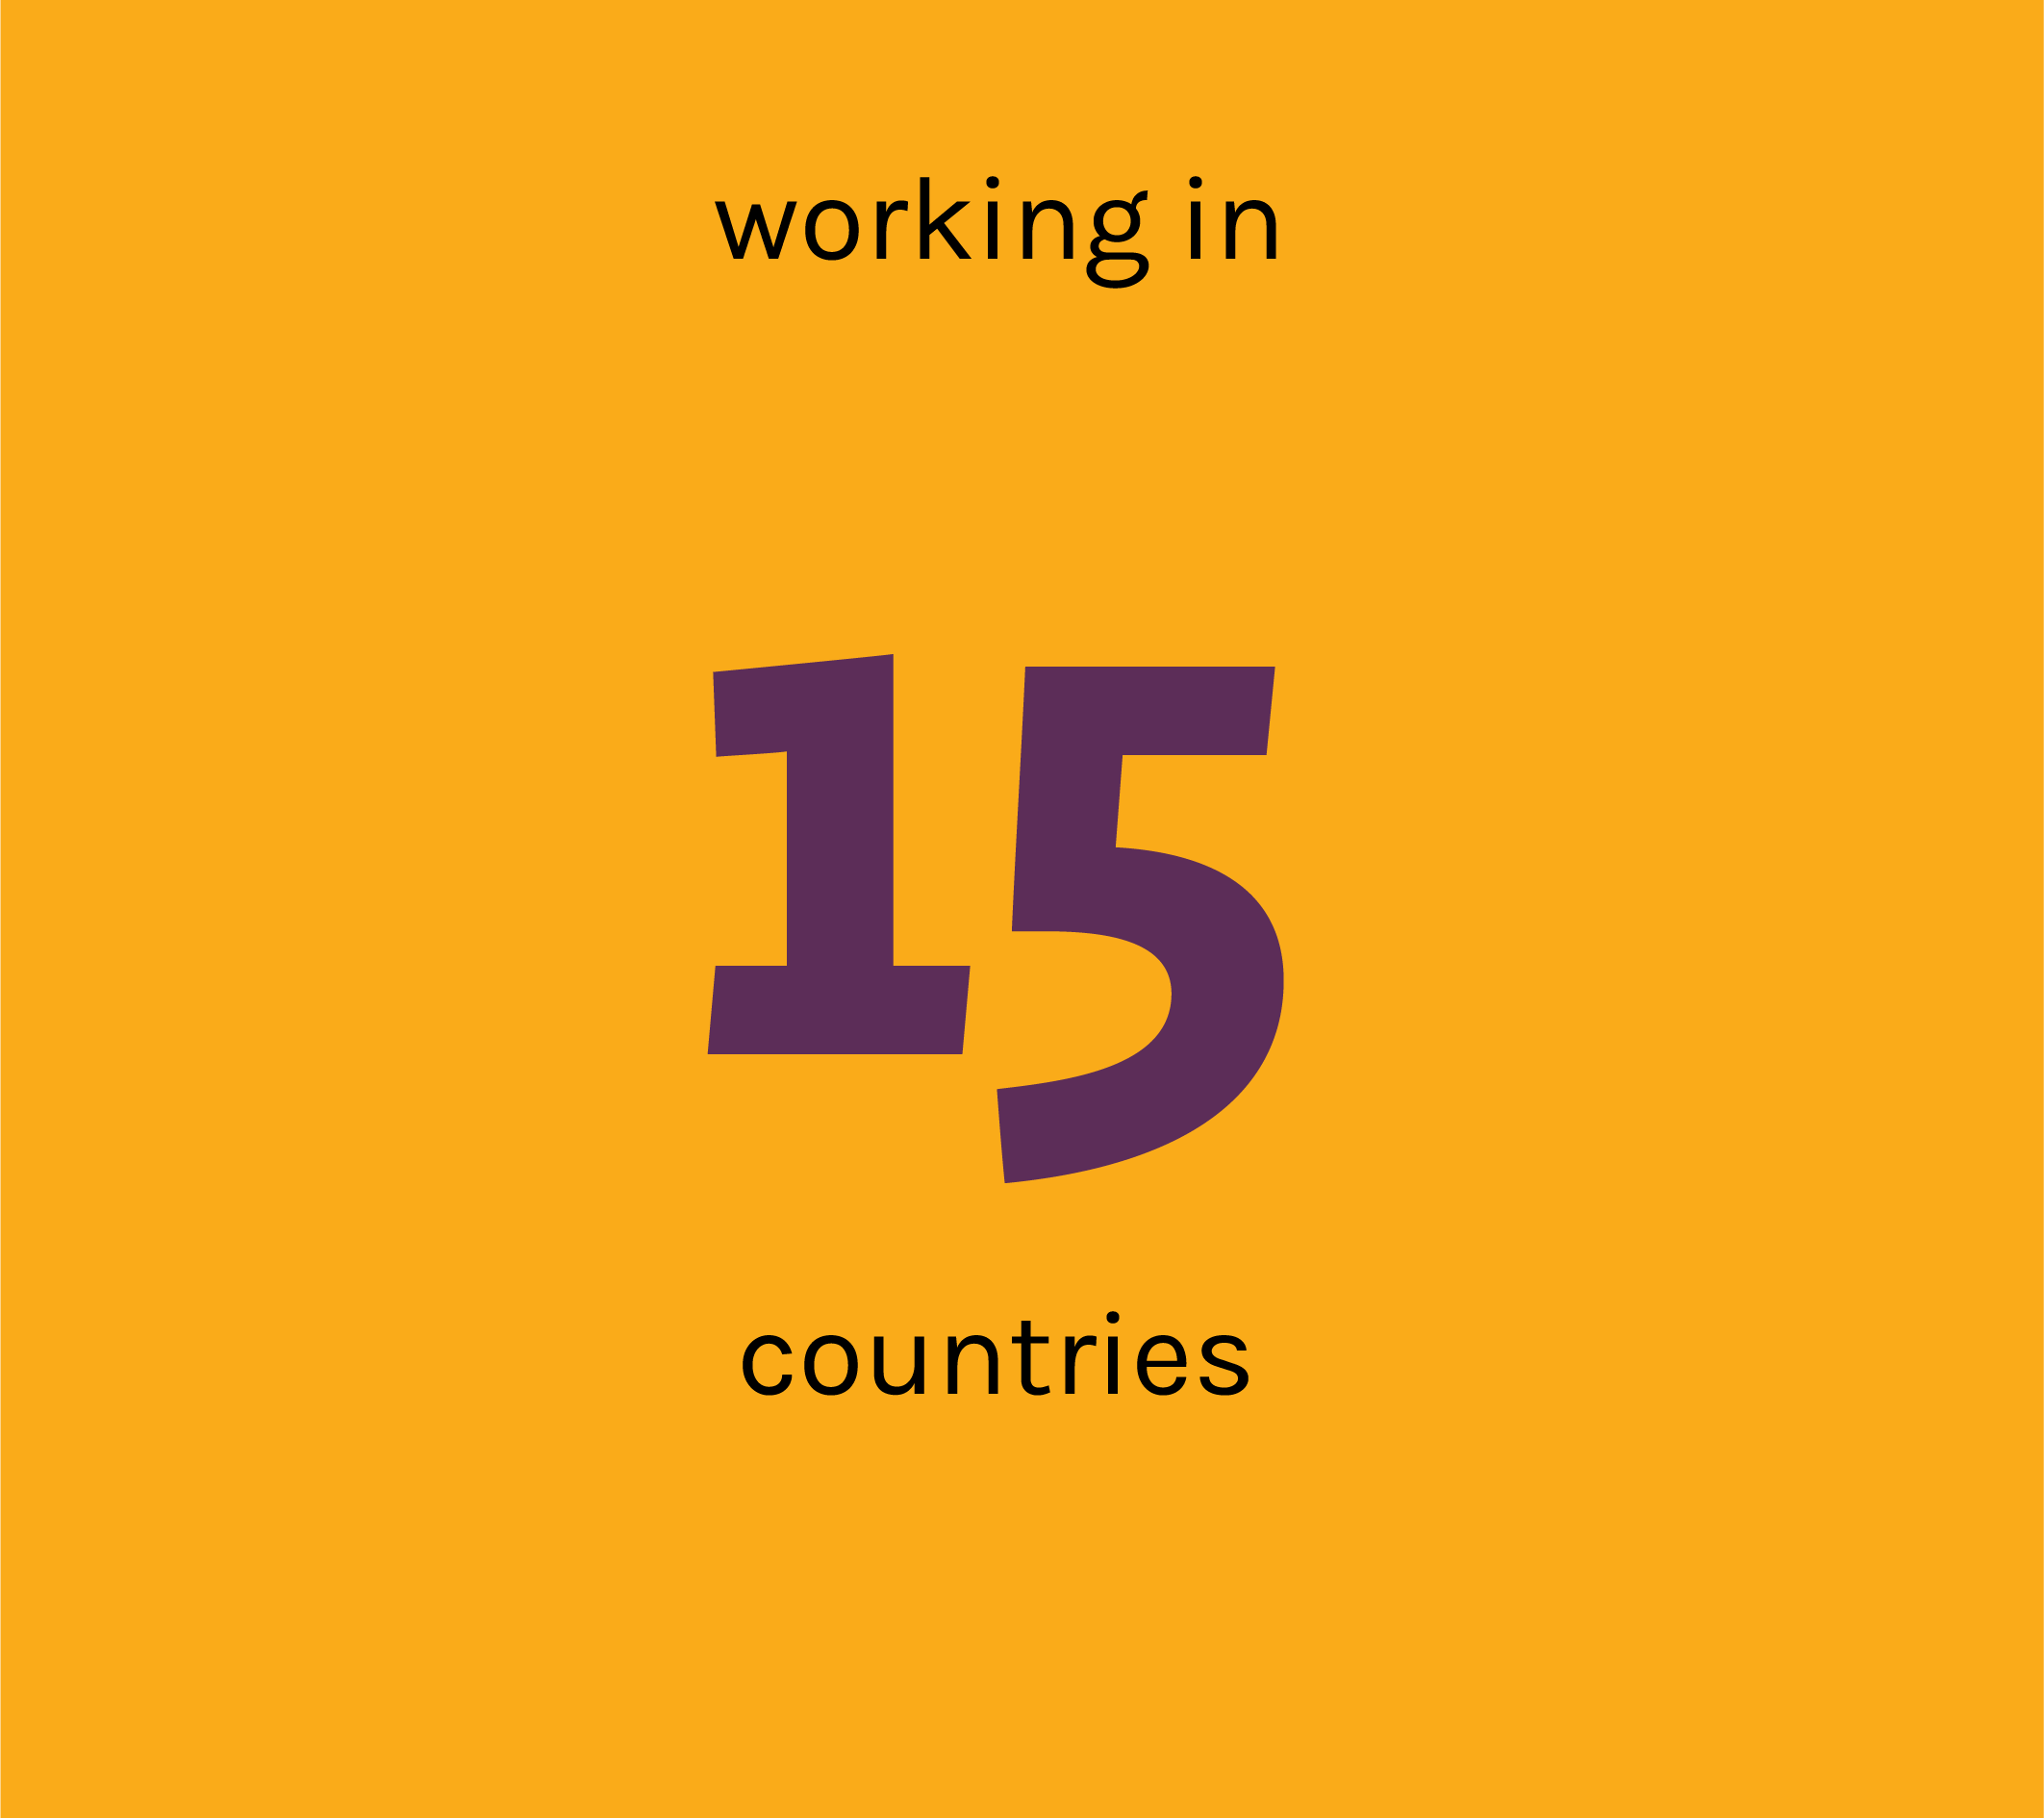 Working in 15 countries